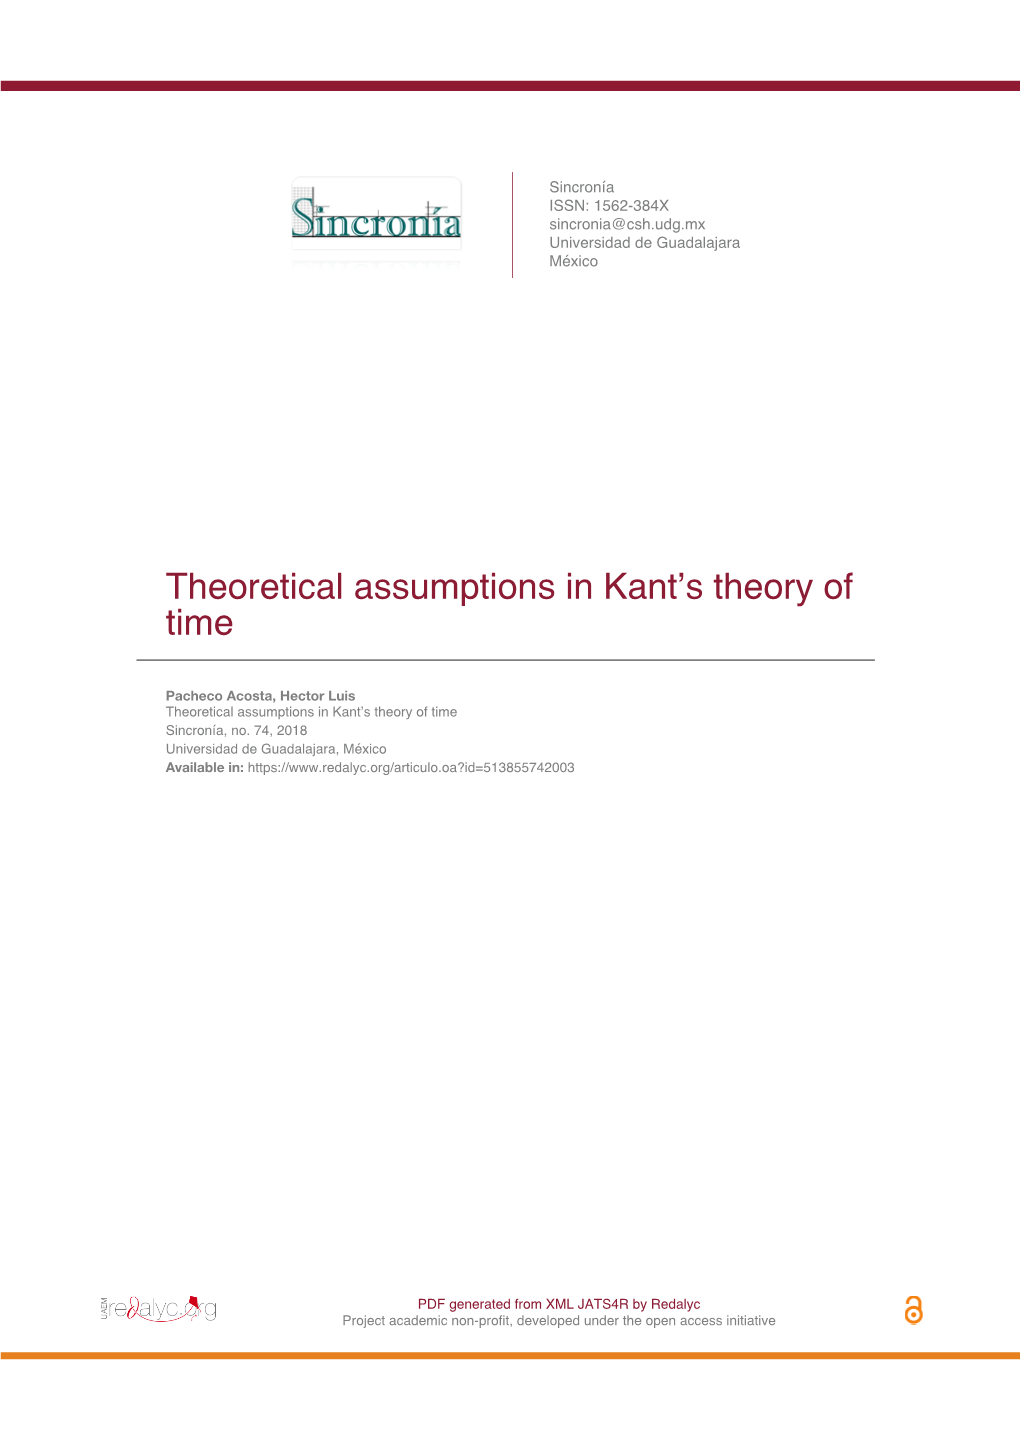 Theoretical Assumptions in Kant's Theory of Time